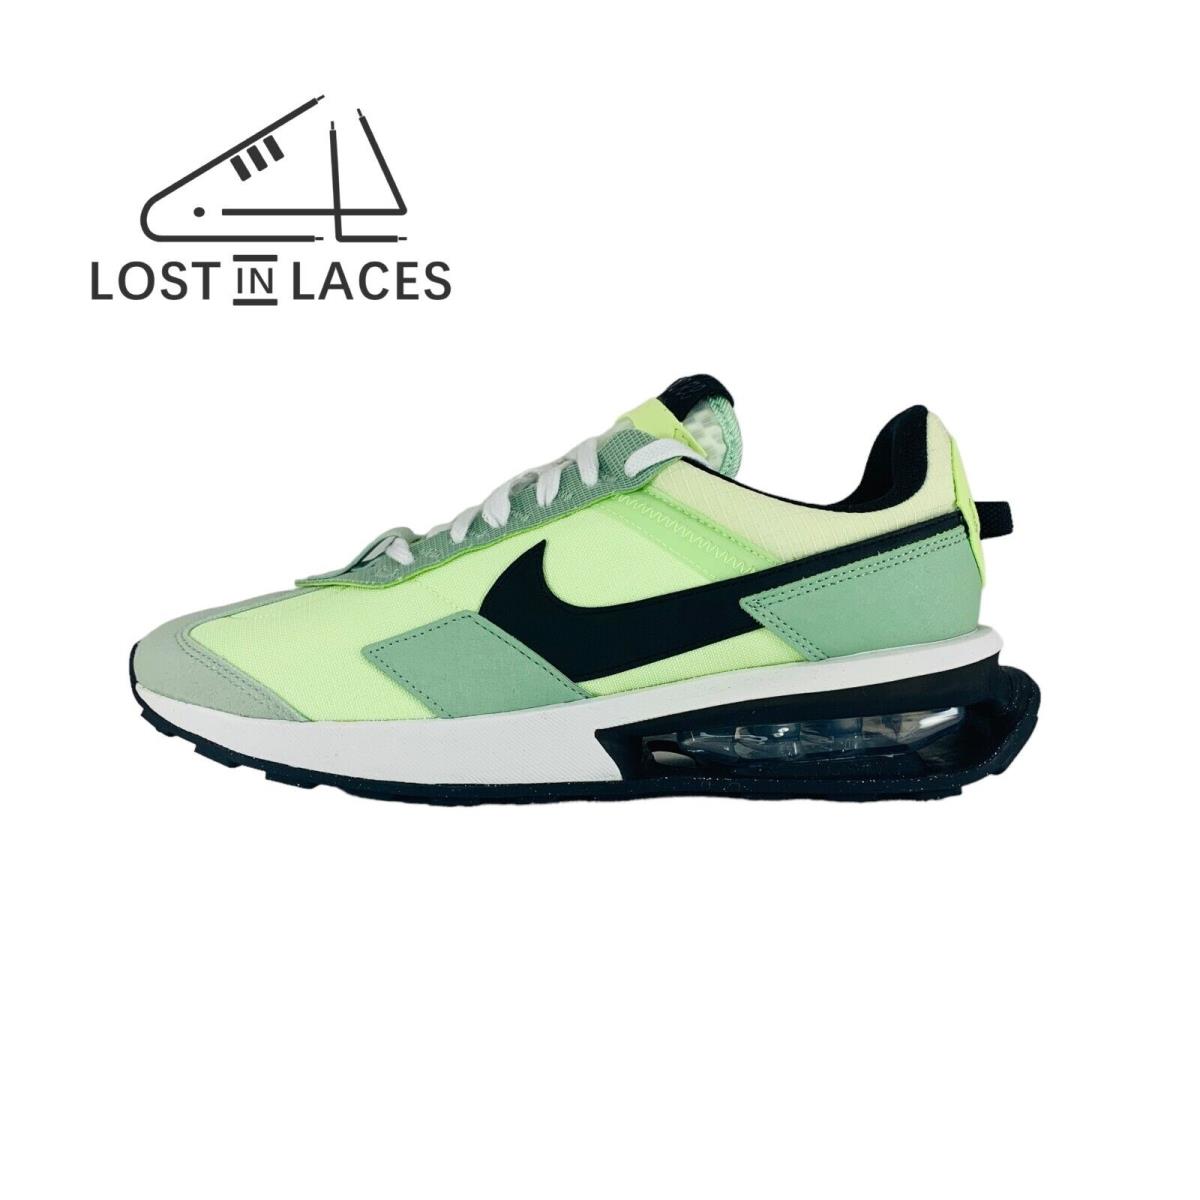 Nike Air Max Pre-day Lifestyle Green Sneakers Women`s Shoes DZ4874-300